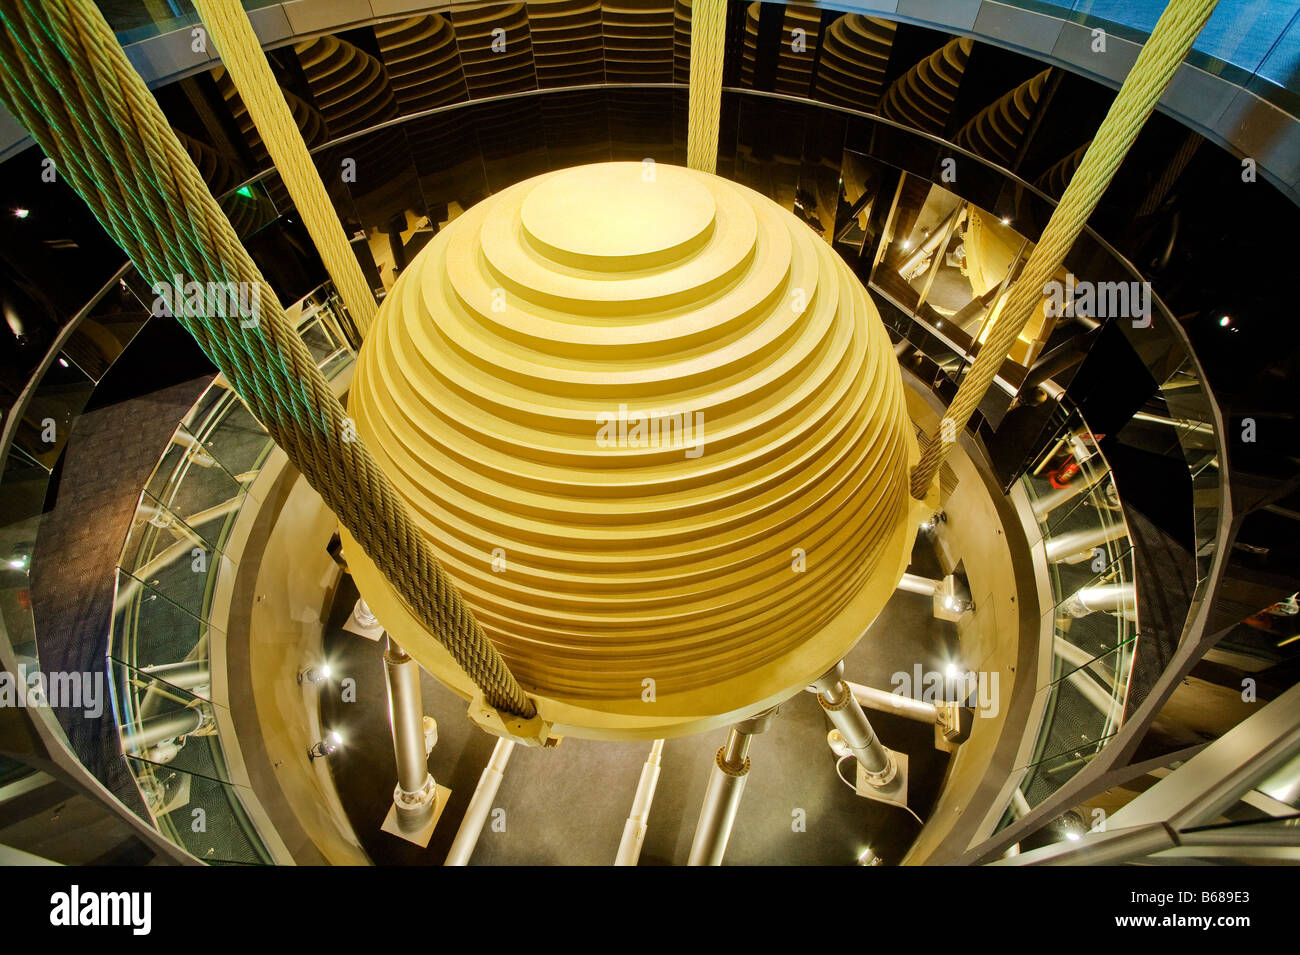 Taipei, Taiwan - The massive Wind Damper inside of Taipei 101, one of the tallest buildings in the world Stock Photo